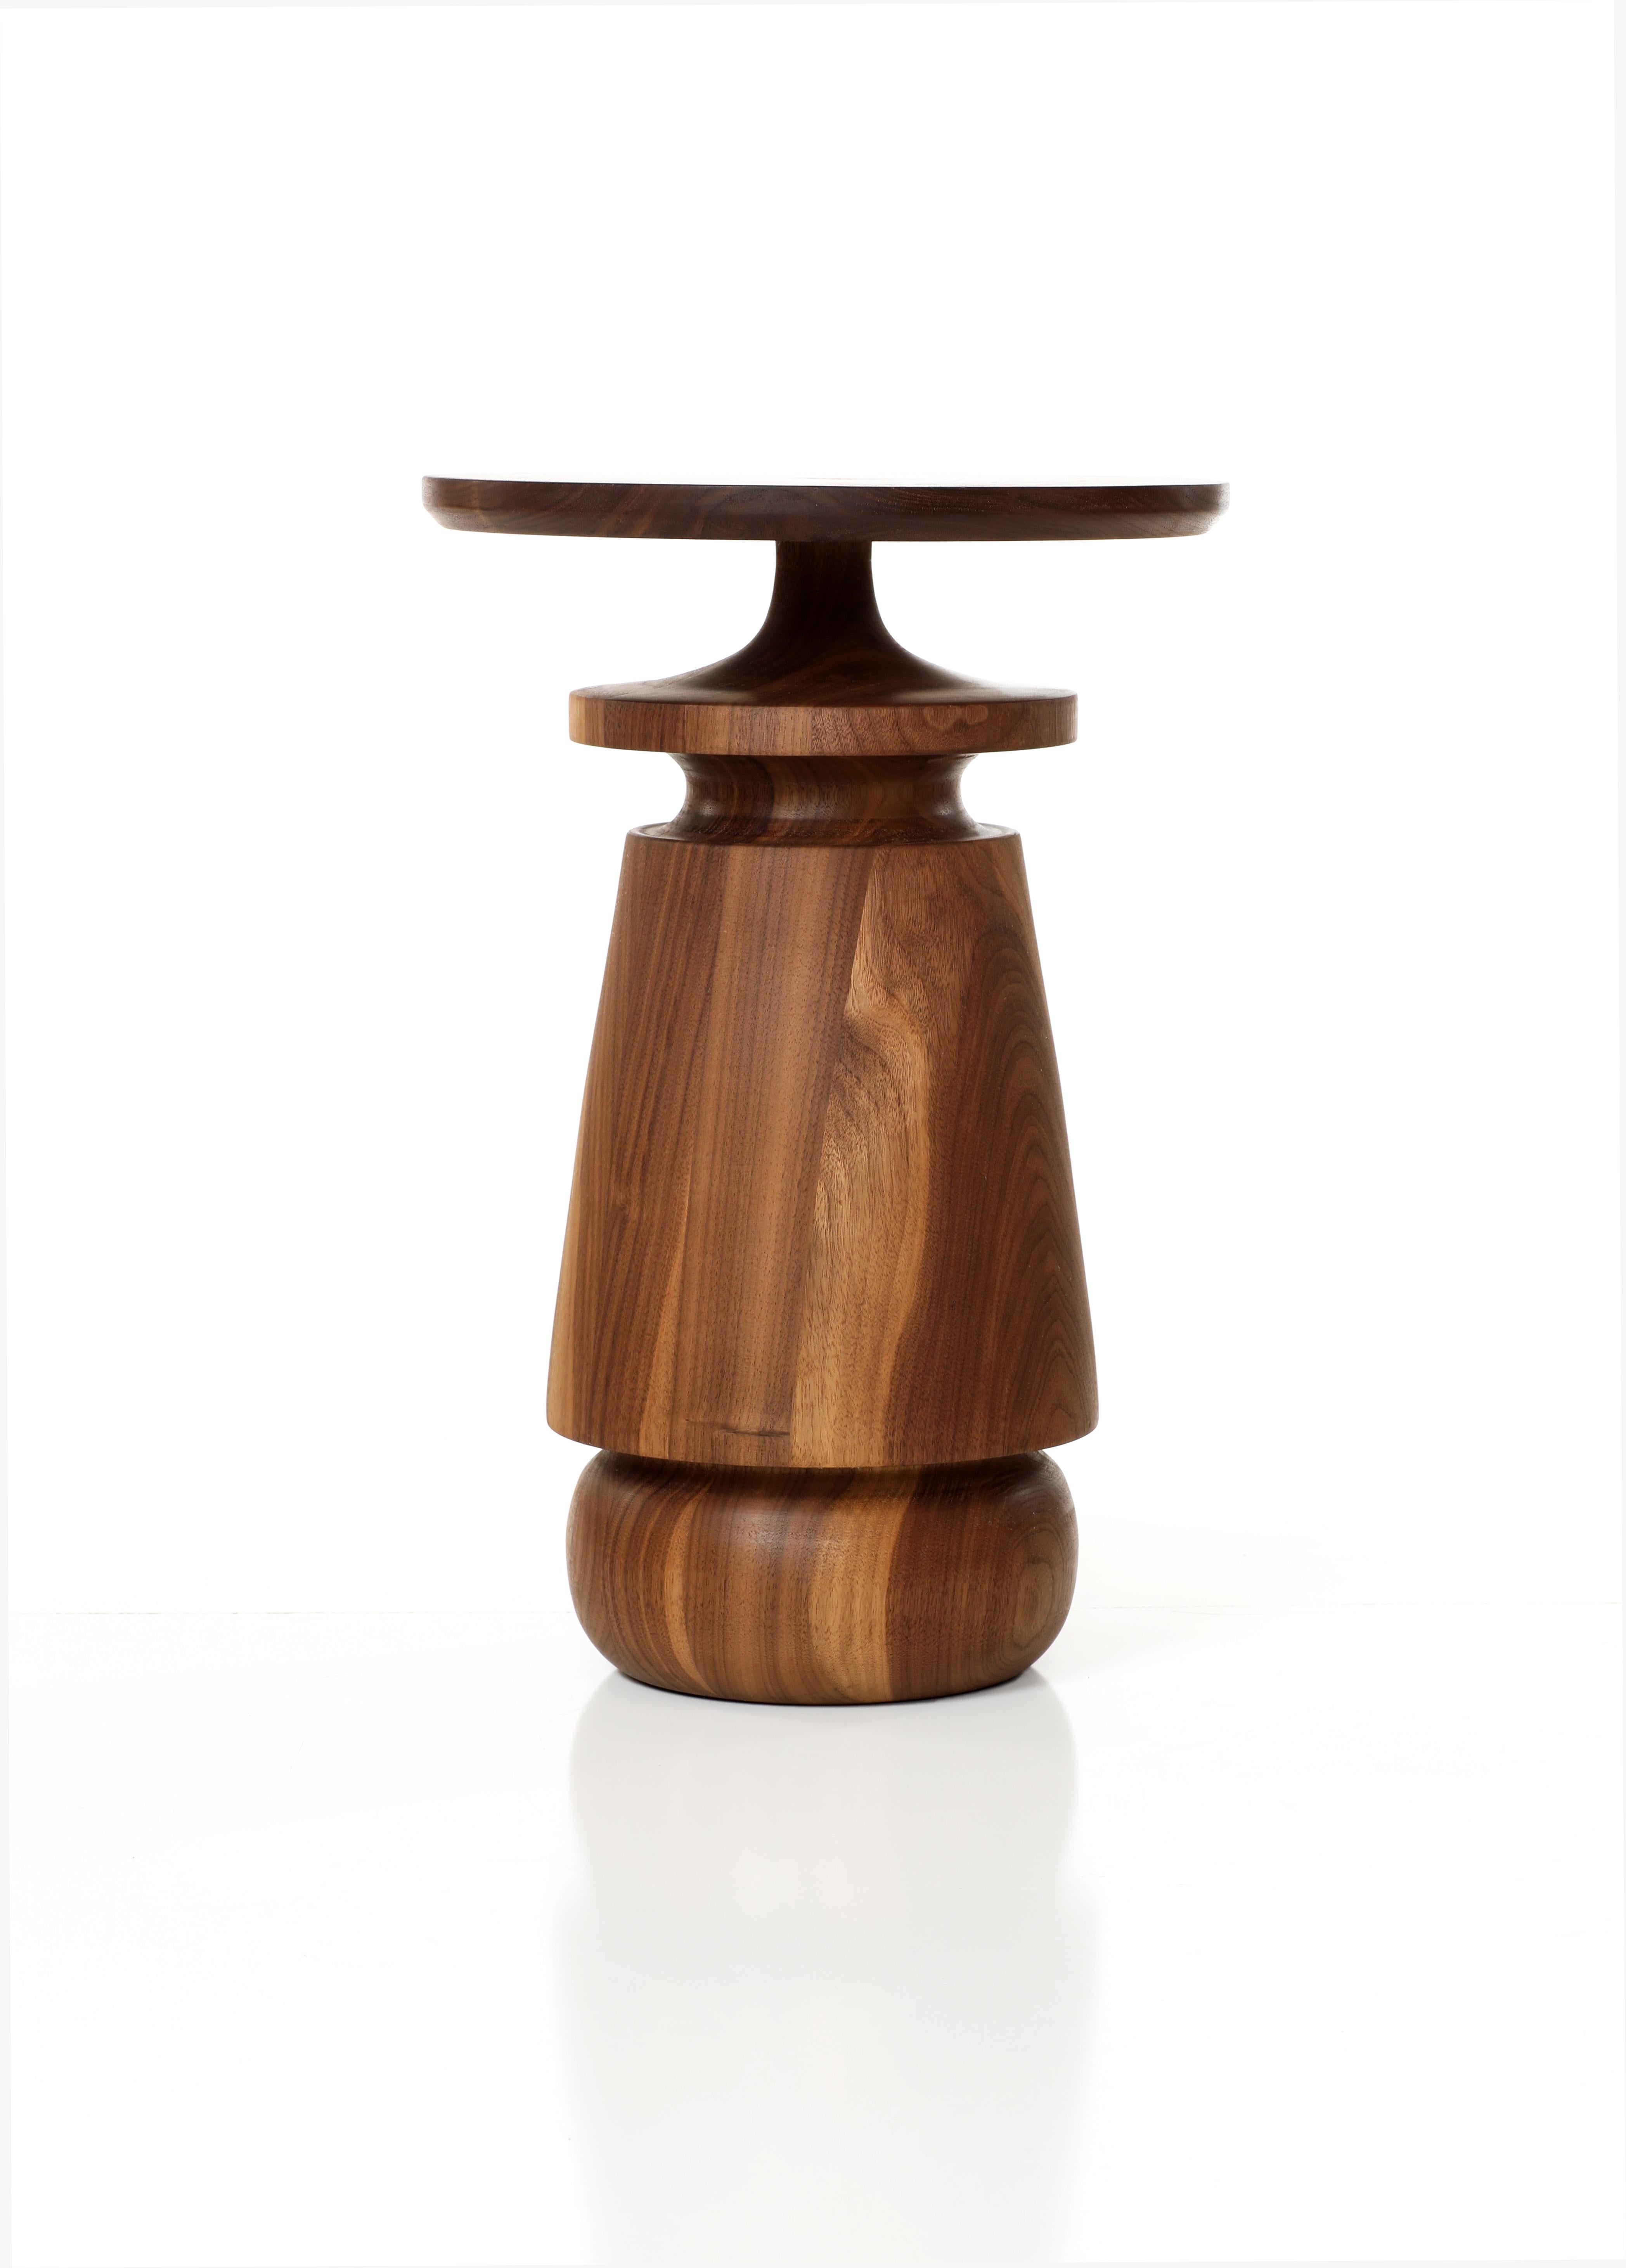 Lathe turned Walnut or white oak side table form (FB23a) hand-crafted by Michael Rozell. A similar model (FB23b) is available too. 